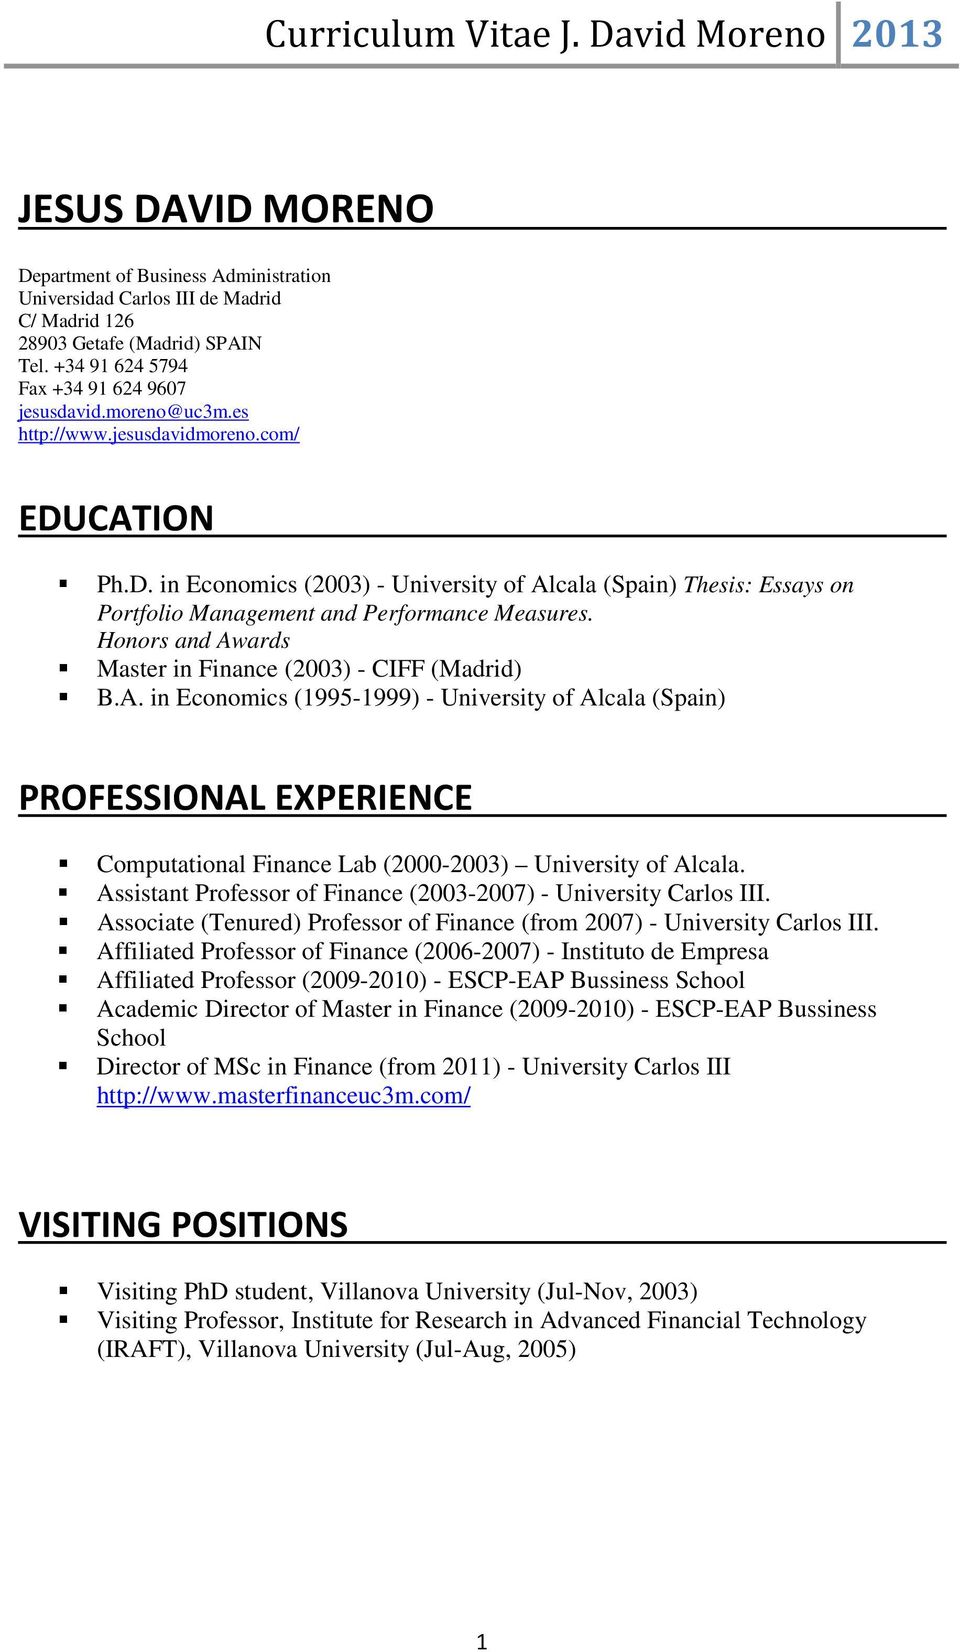 Honors and Awards Master in Finance (2003) - CIFF (Madrid) B.A. in Economics (1995-1999) - University of Alcala (Spain) PROFESSIONAL EXPERIENCE Computational Finance Lab (2000-2003) University of Alcala.